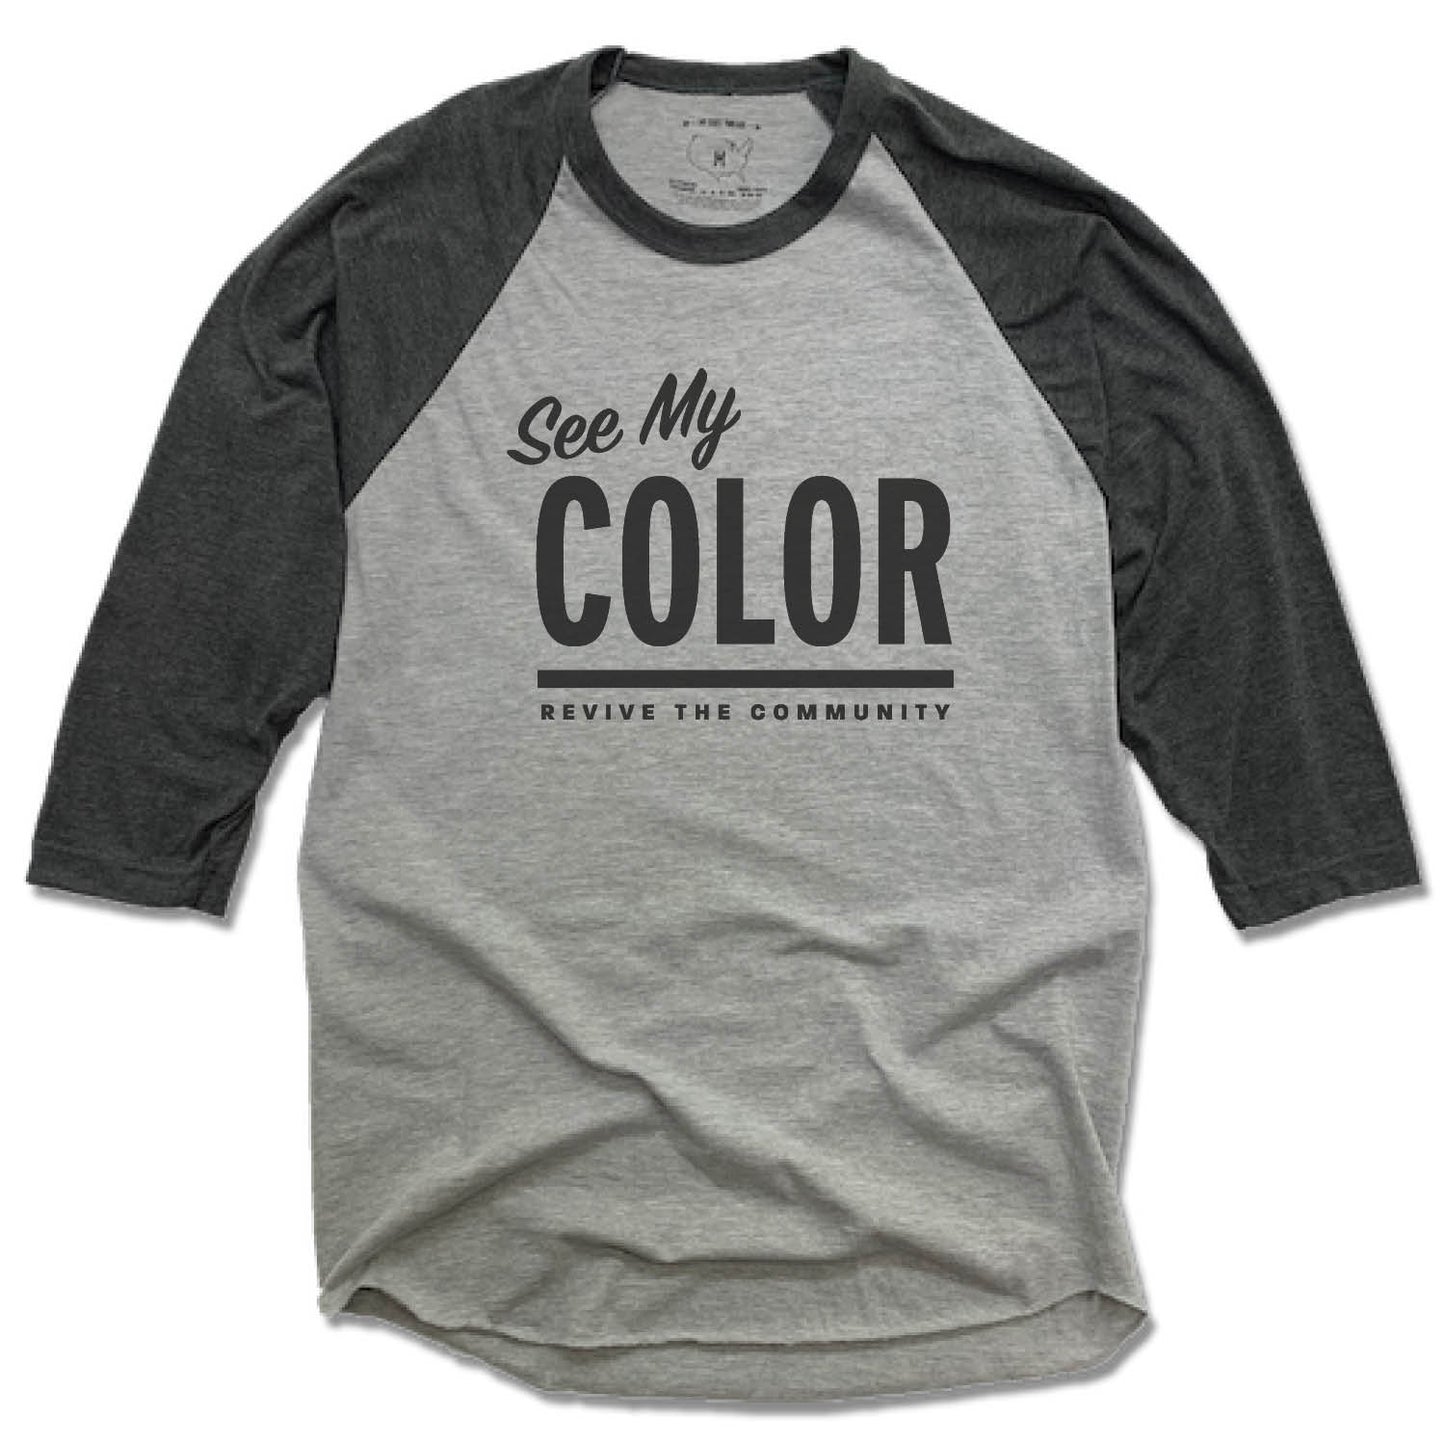 REVIVE THE COMMUNITY | GRAY 3/4 SLEEVE | SEE MY COLOR